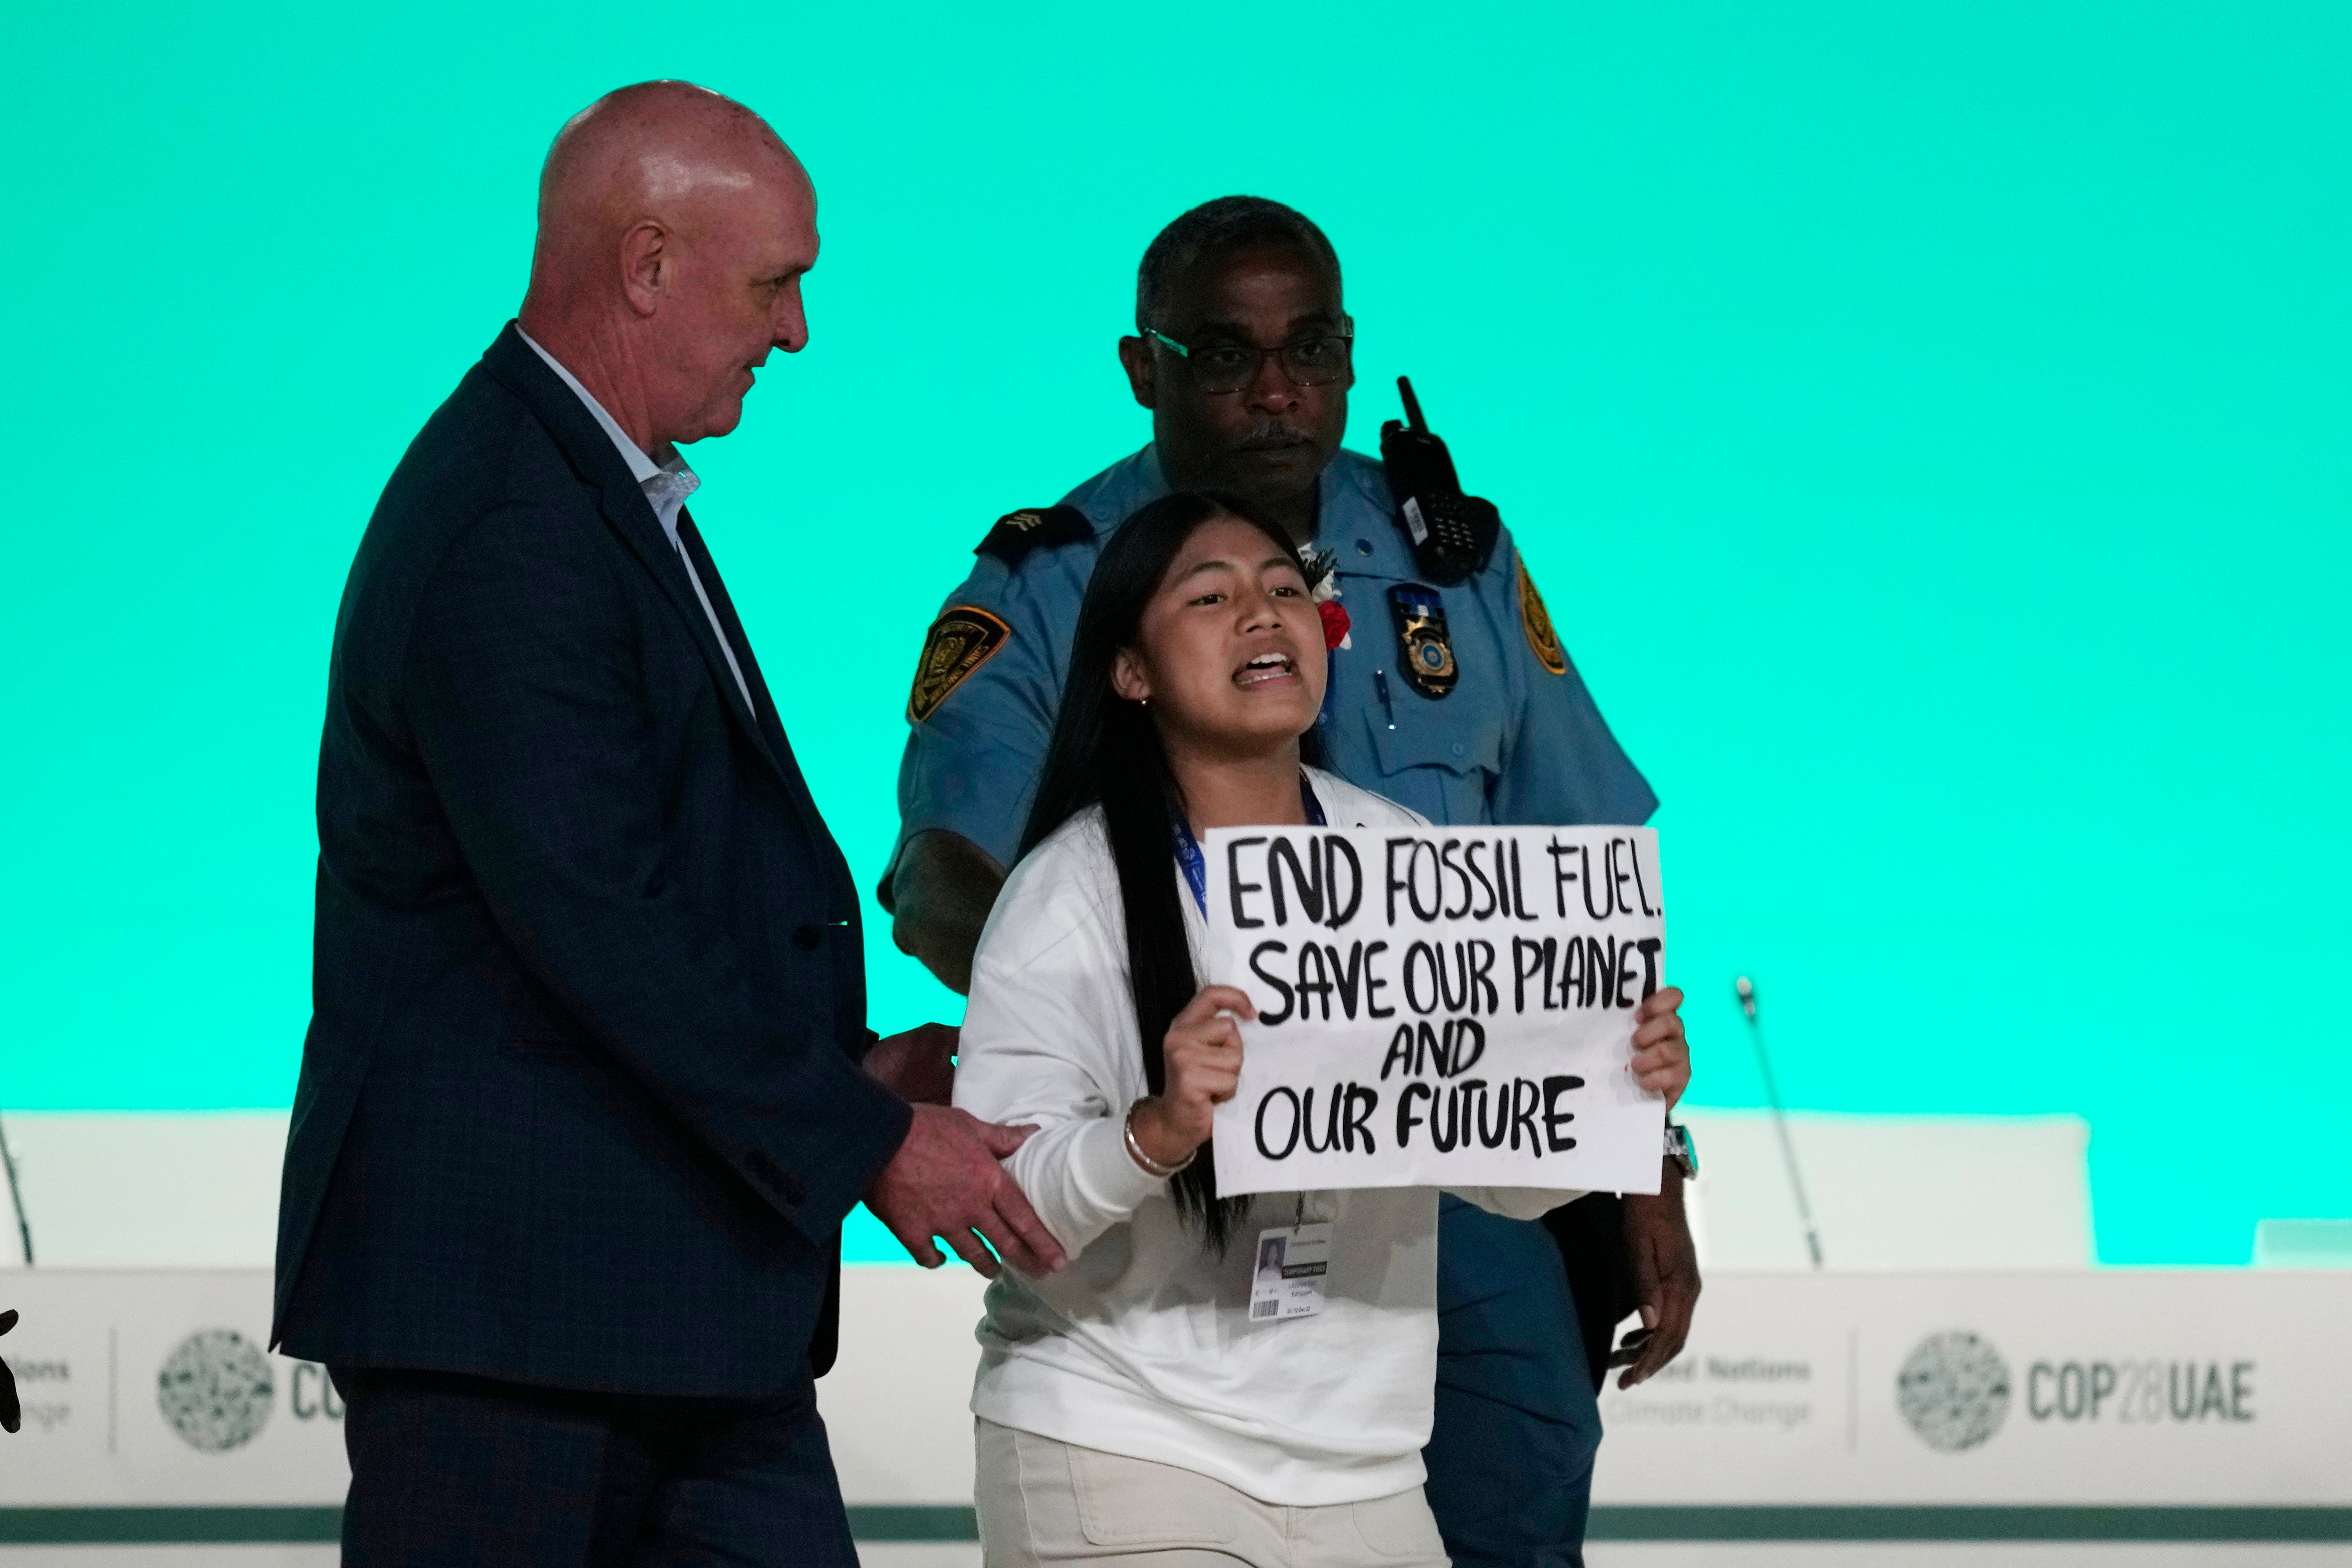 Licypriya Kangujam protests against fossil fuels during an event at the COP28 UN climate summit